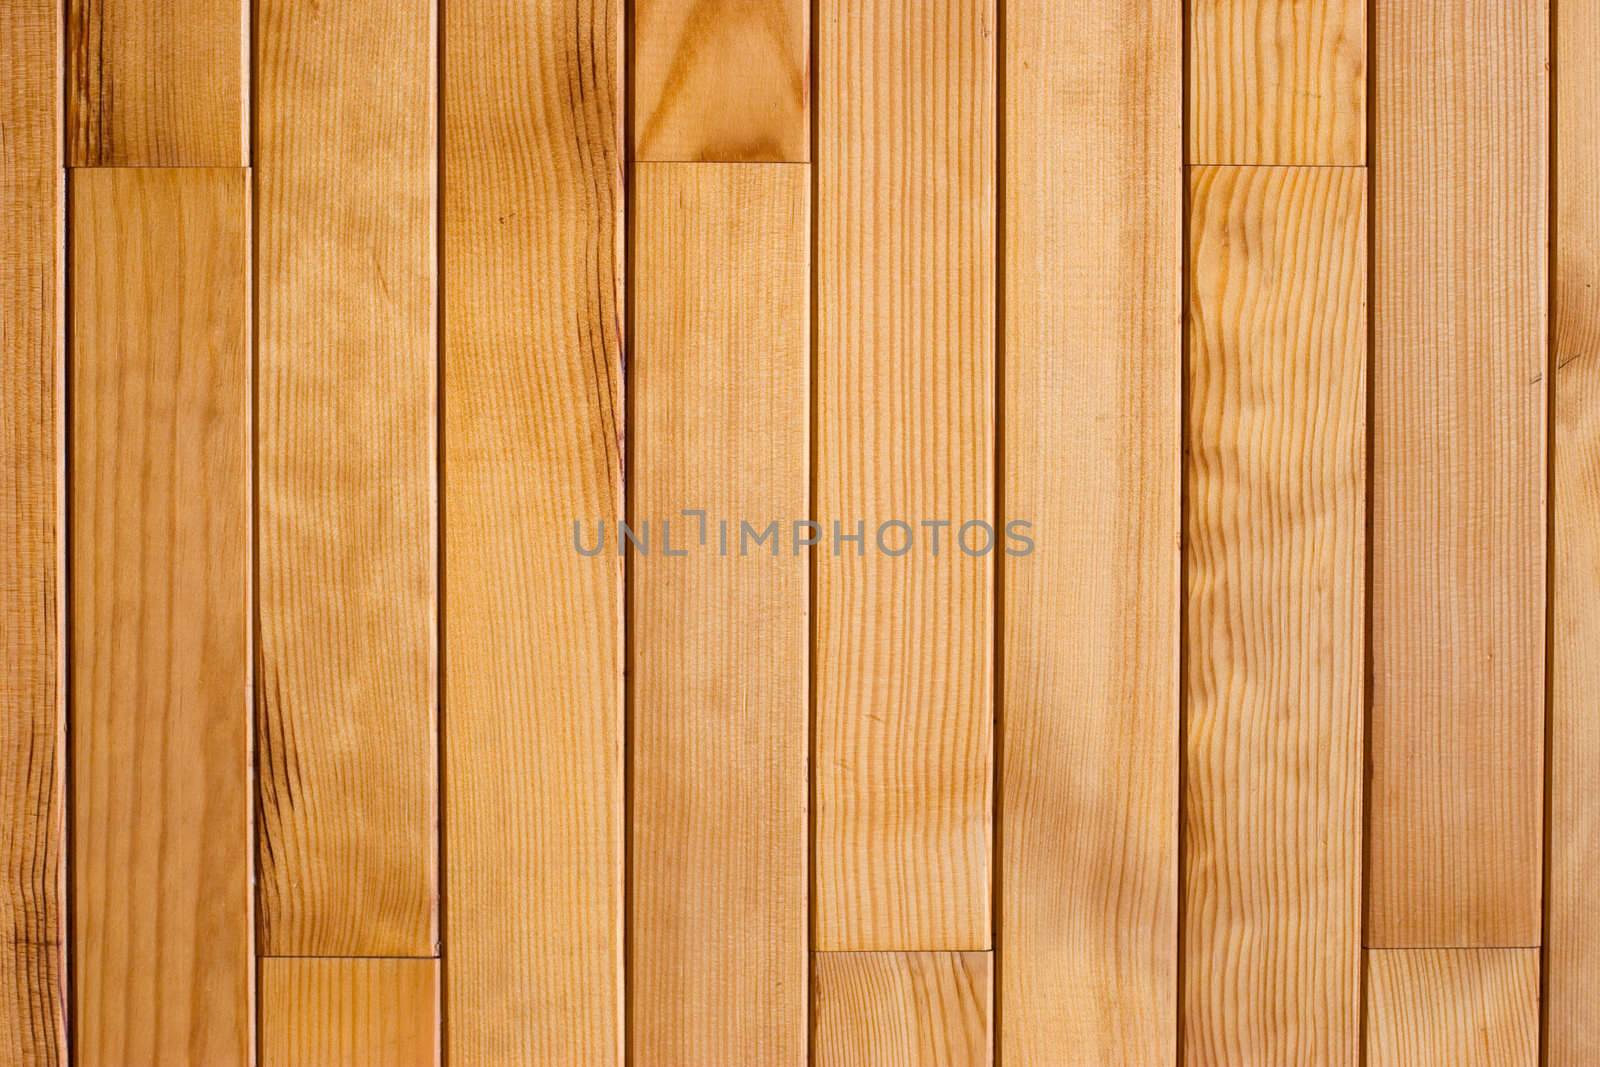 The wall decorated by varnished wooden planks background pattern